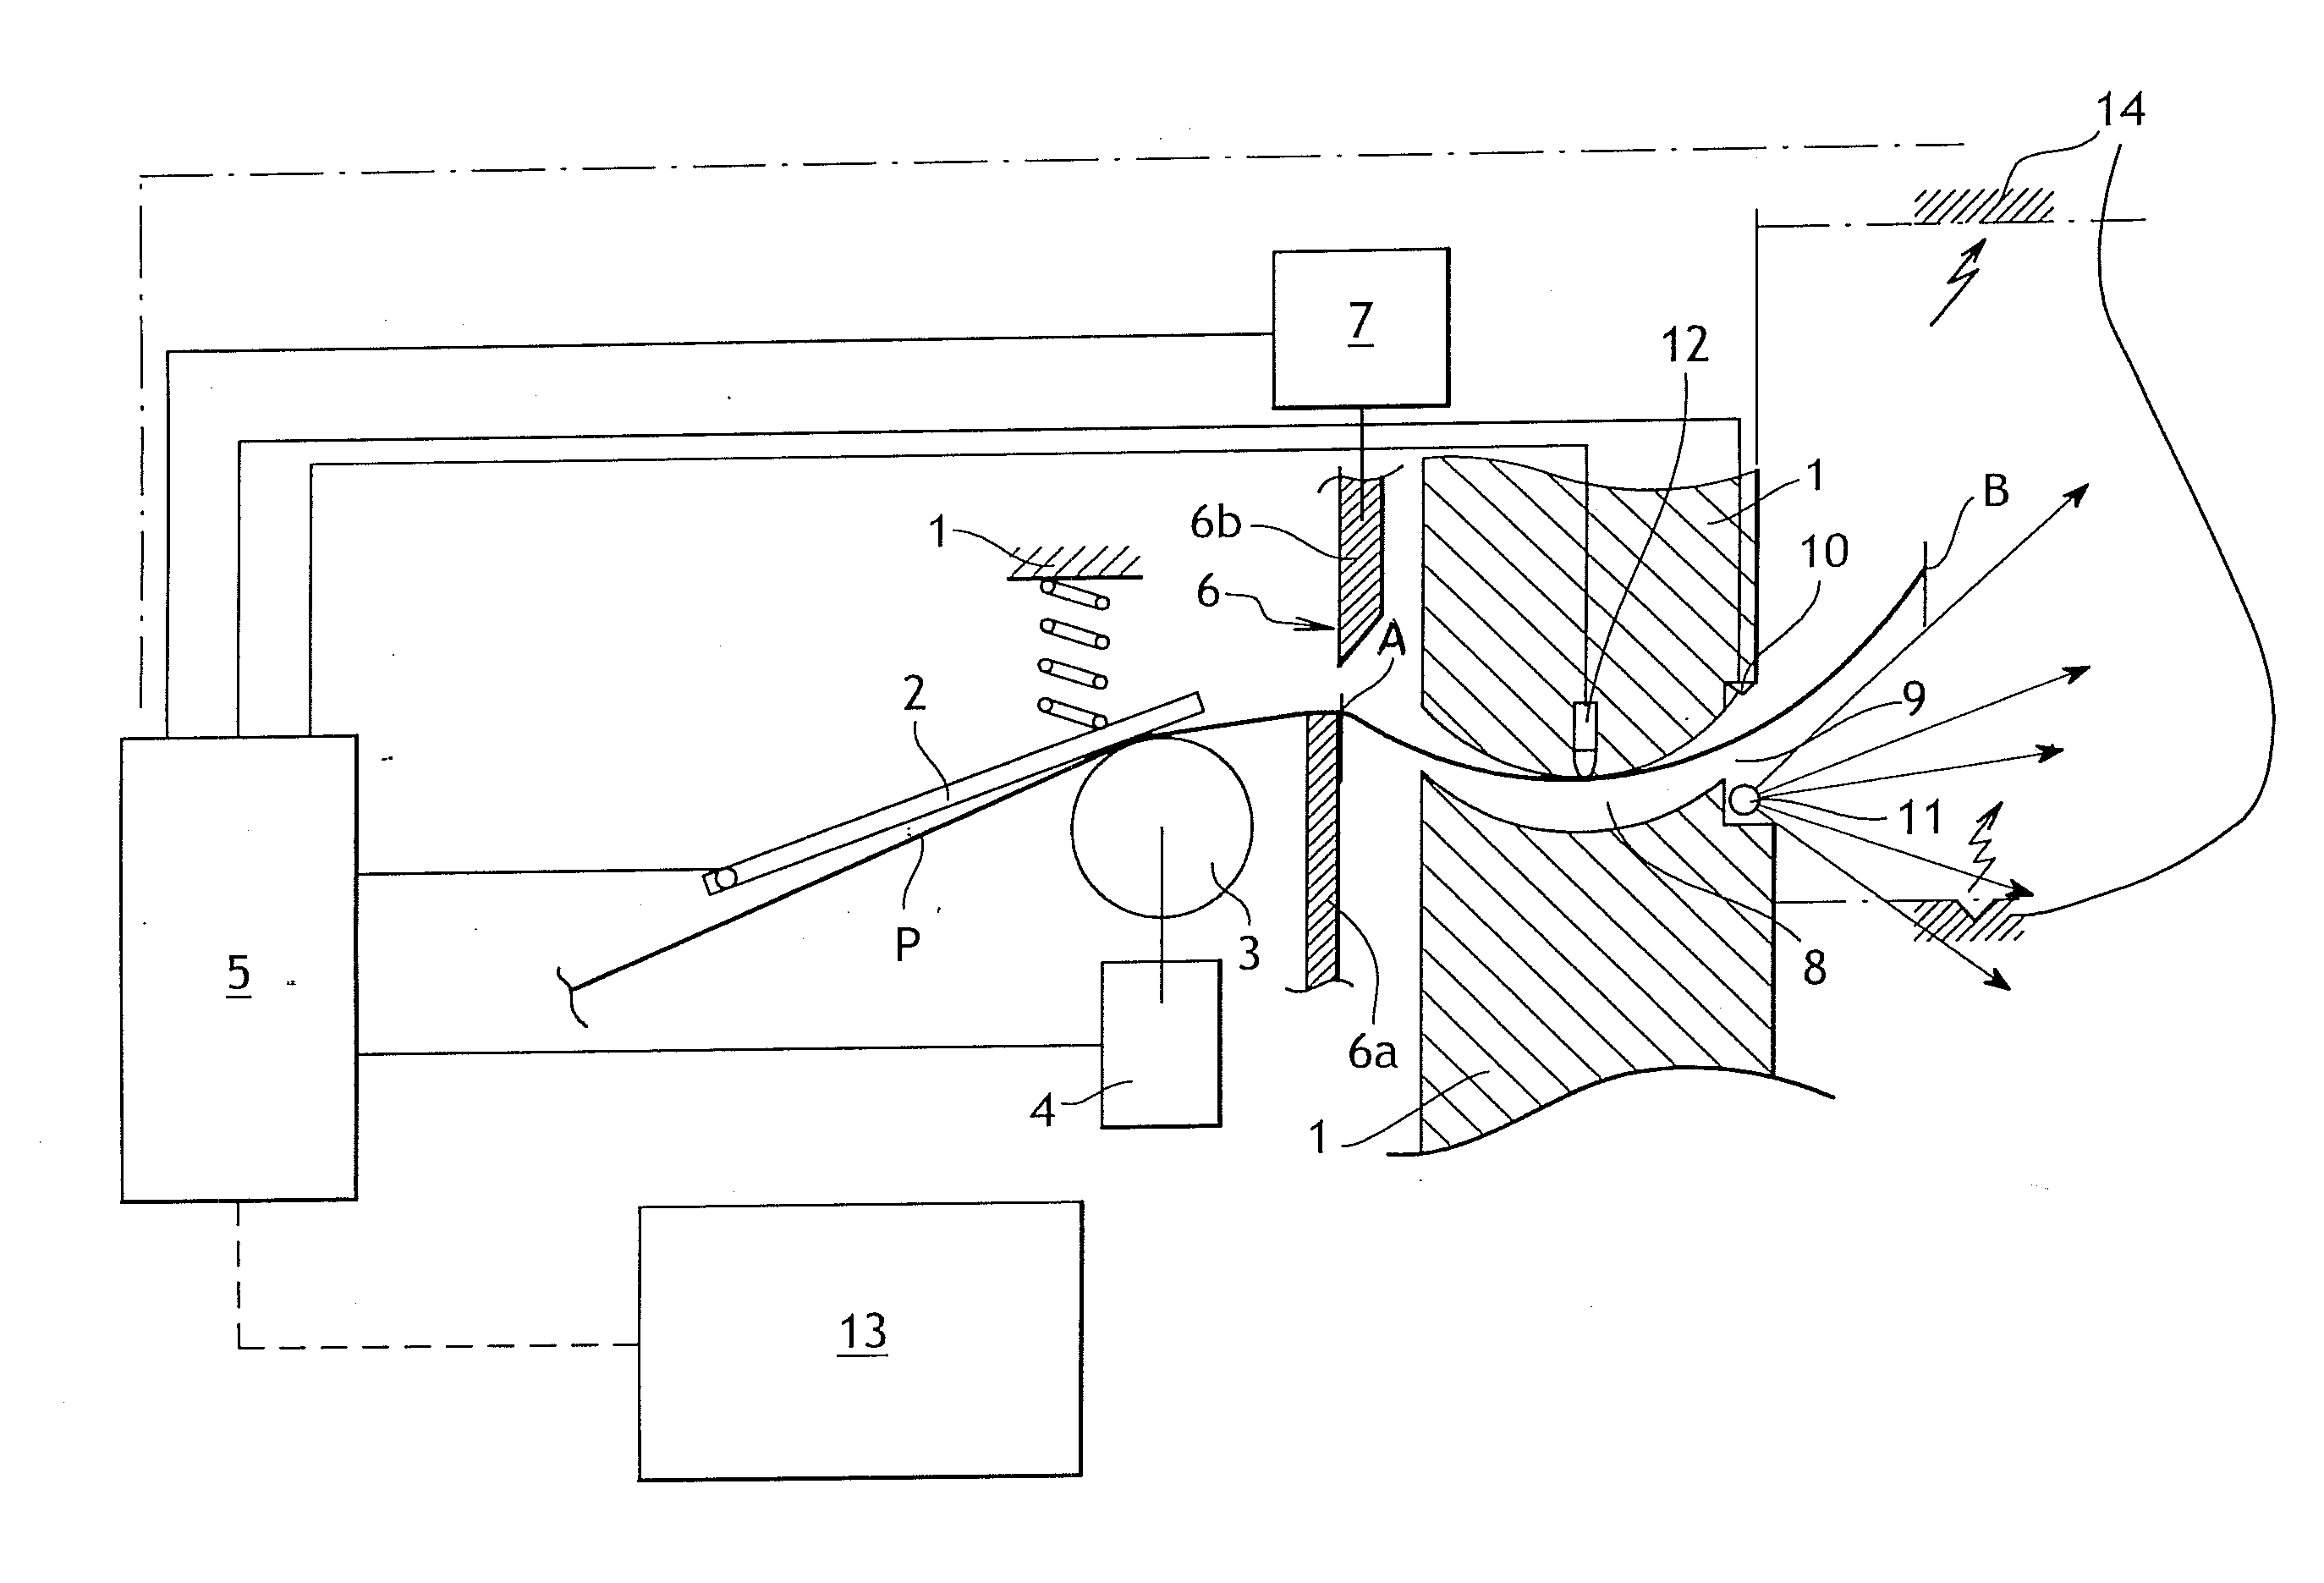 Method of issuing a printed ticket